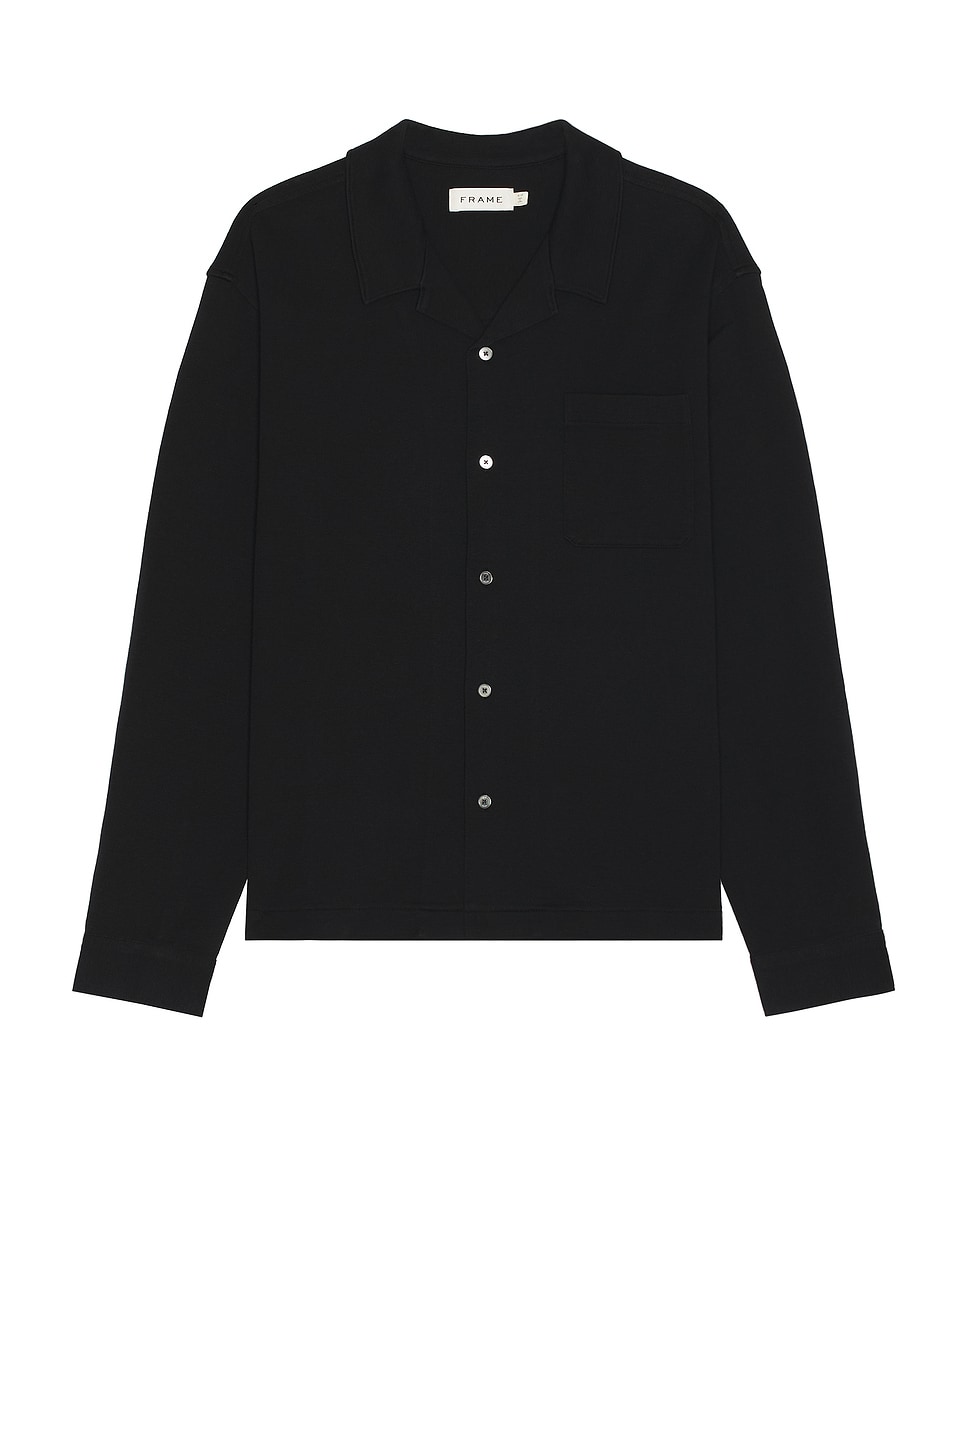 Duo Fold Long Sleeve Relaxed Shirt in Black